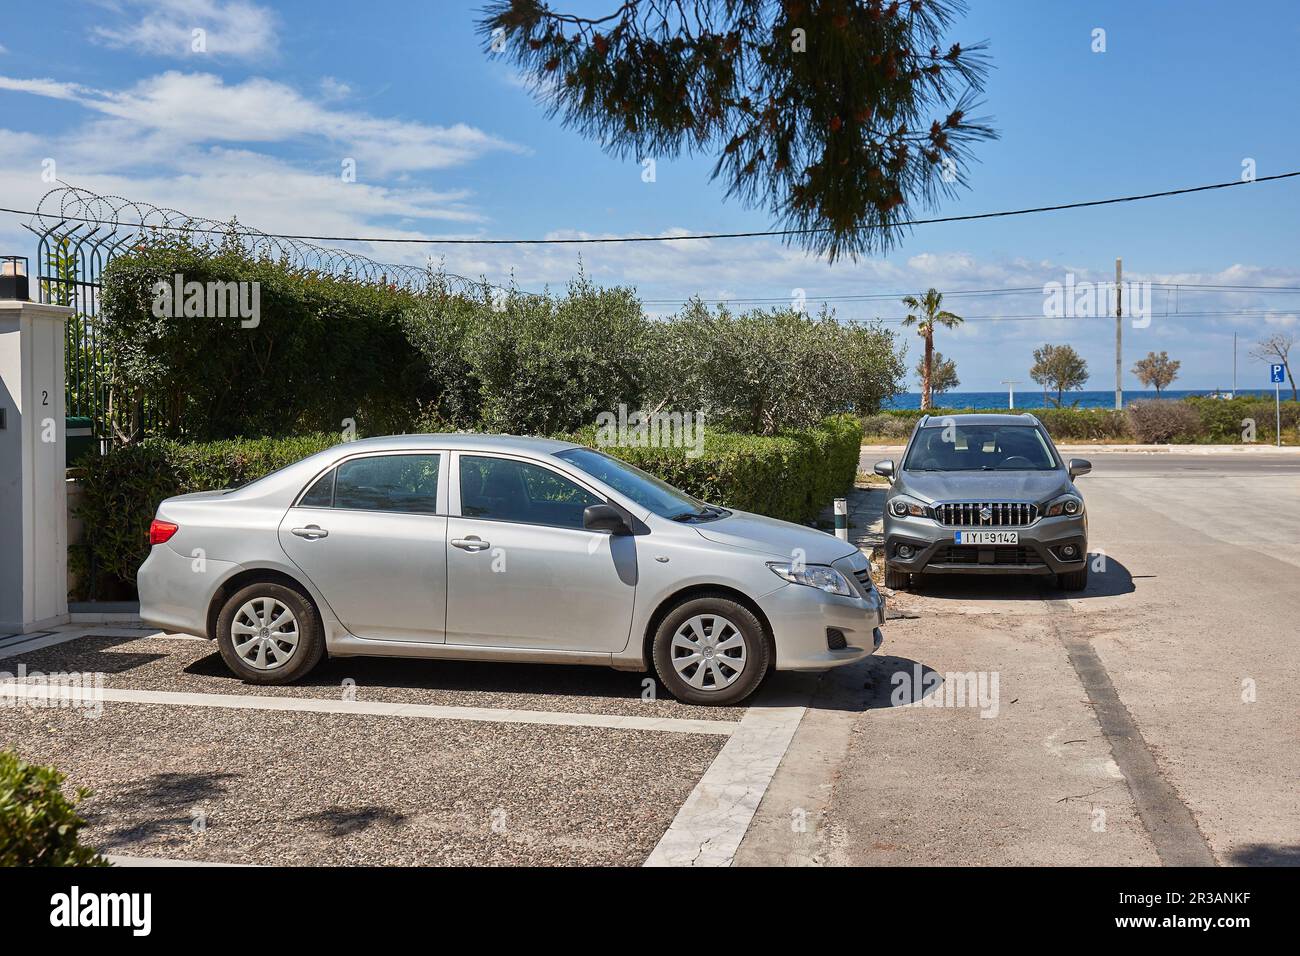 Toyota Corolla parked in Athens, Greece Stock Photo